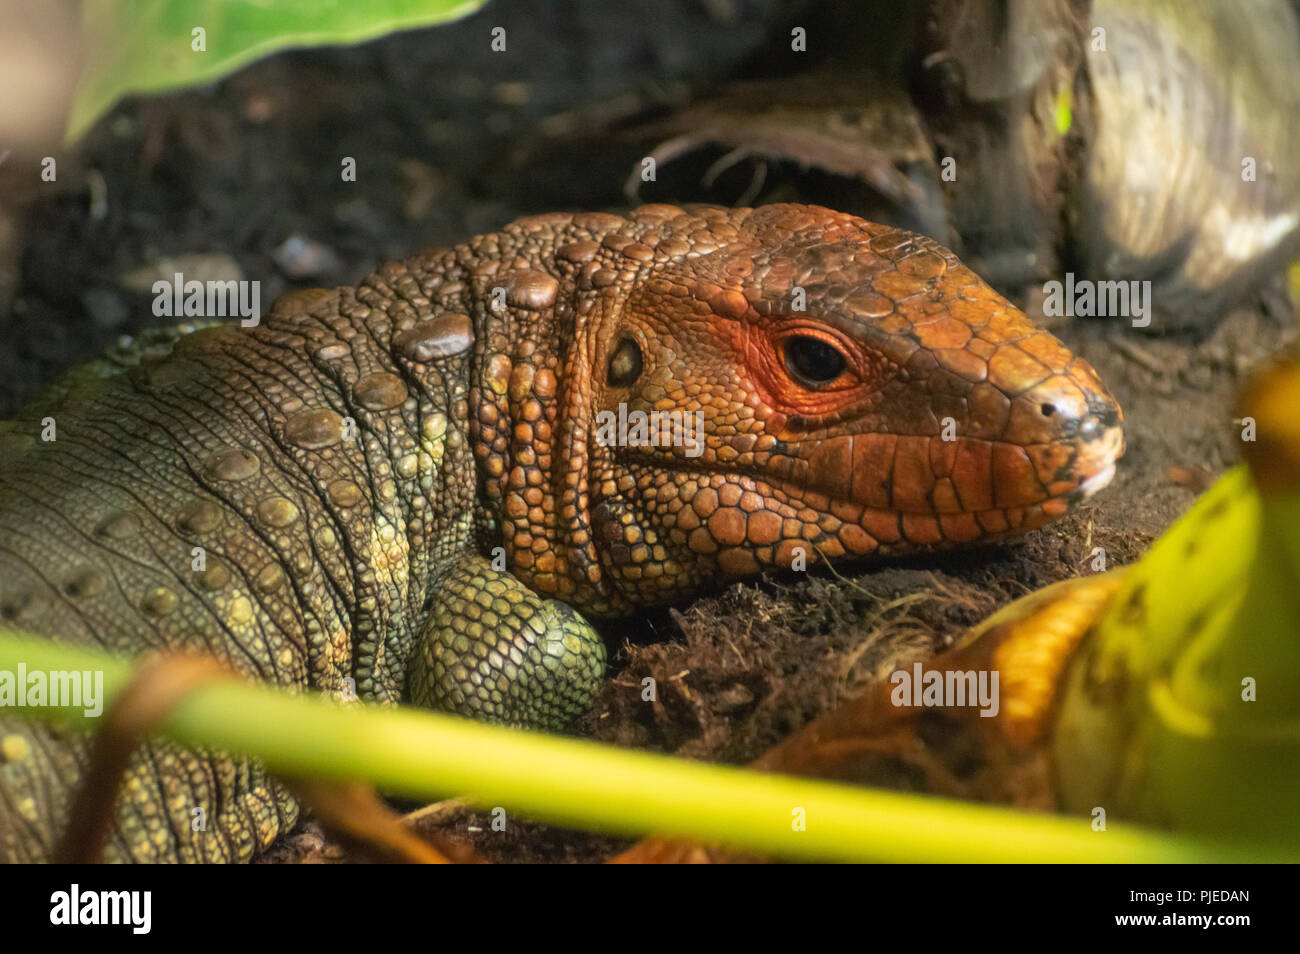 An isolated Northern Caiman lizard in captivity at the zoo. Stock Photo